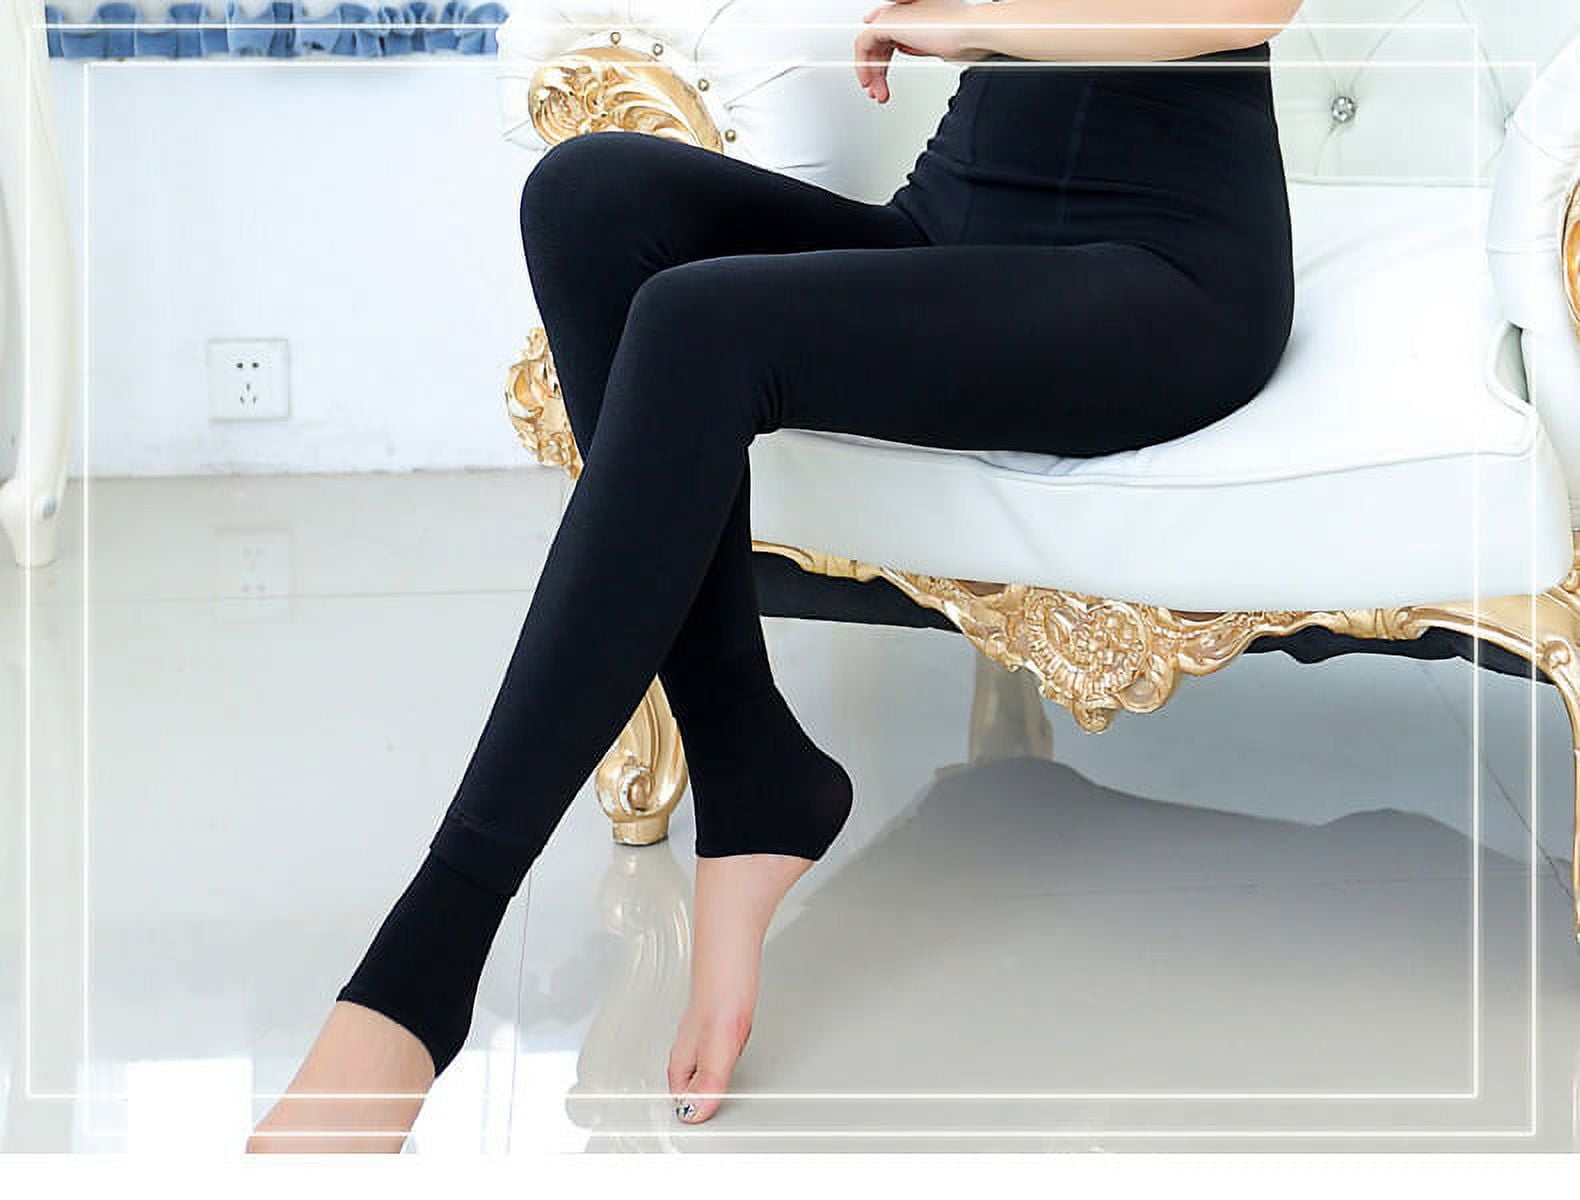 Extra Thick Warm Winter Double Lined Stretch Thermal Fleece Tights For  Women.220g Thick Black Transparent Skin